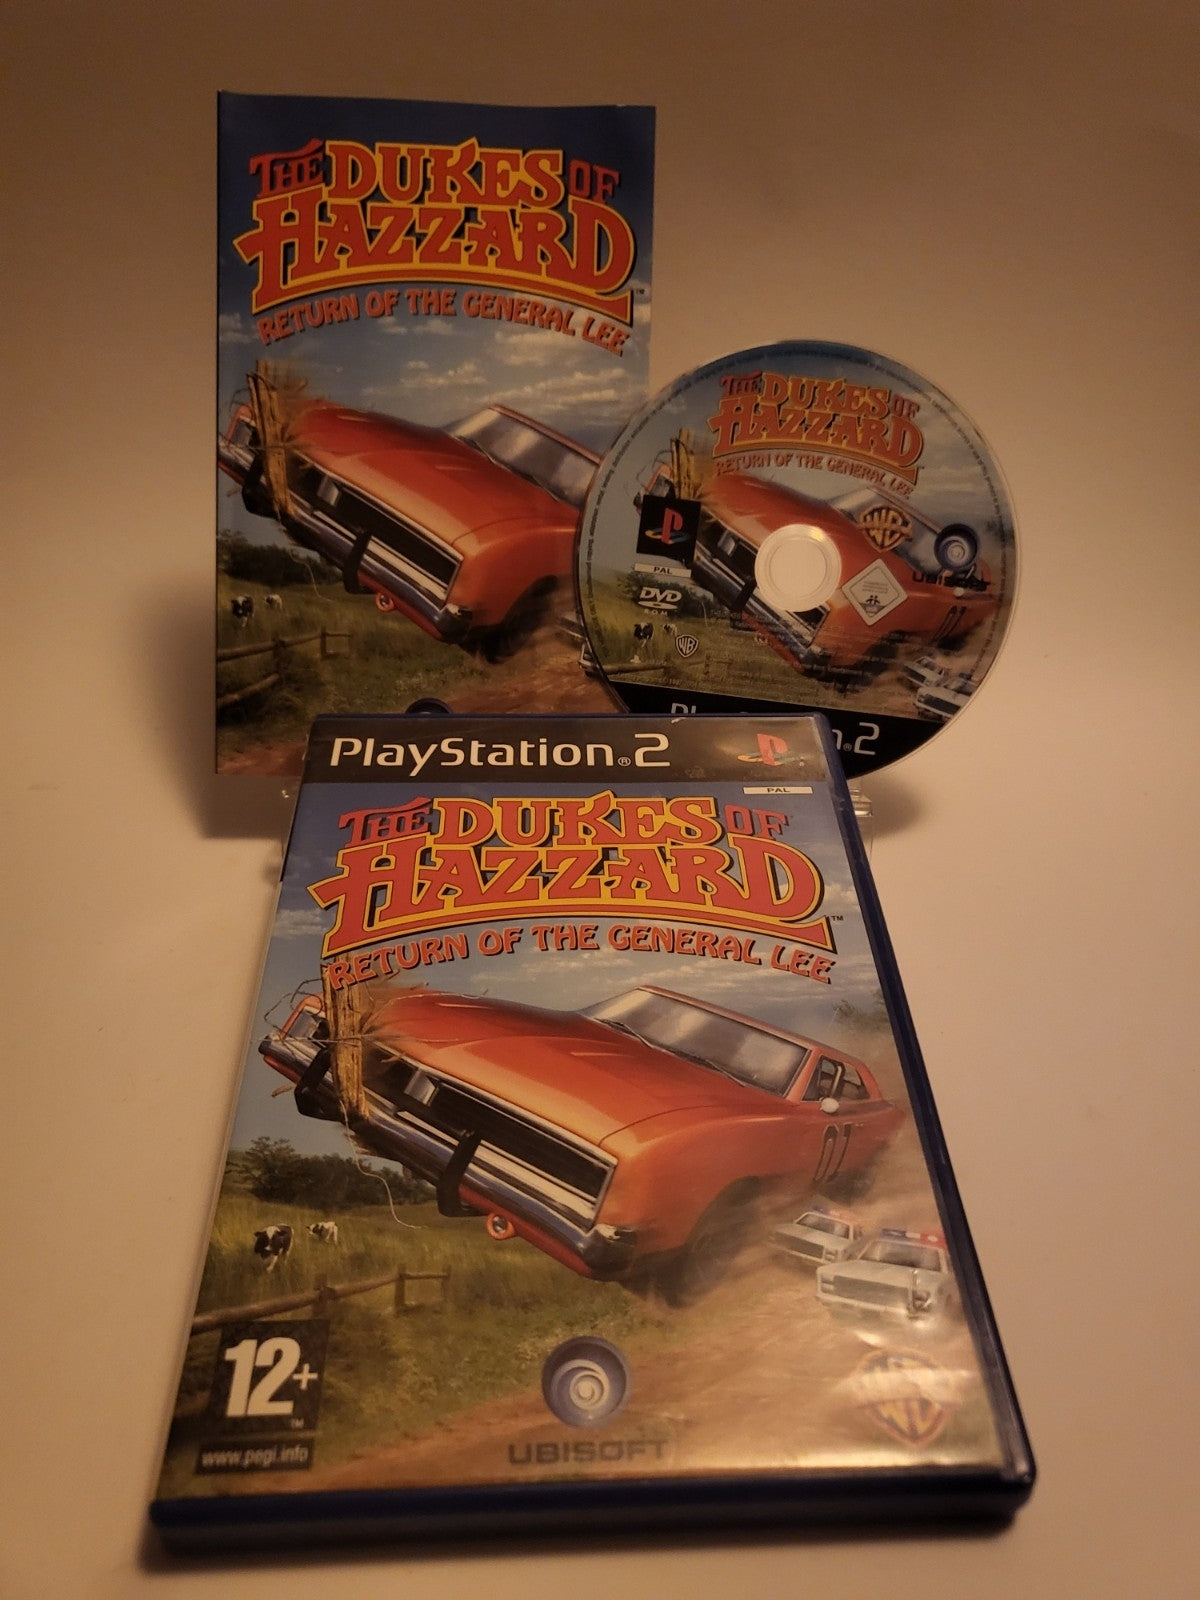 the Dukes of Hazzard Return of the General Lee Playstation 2